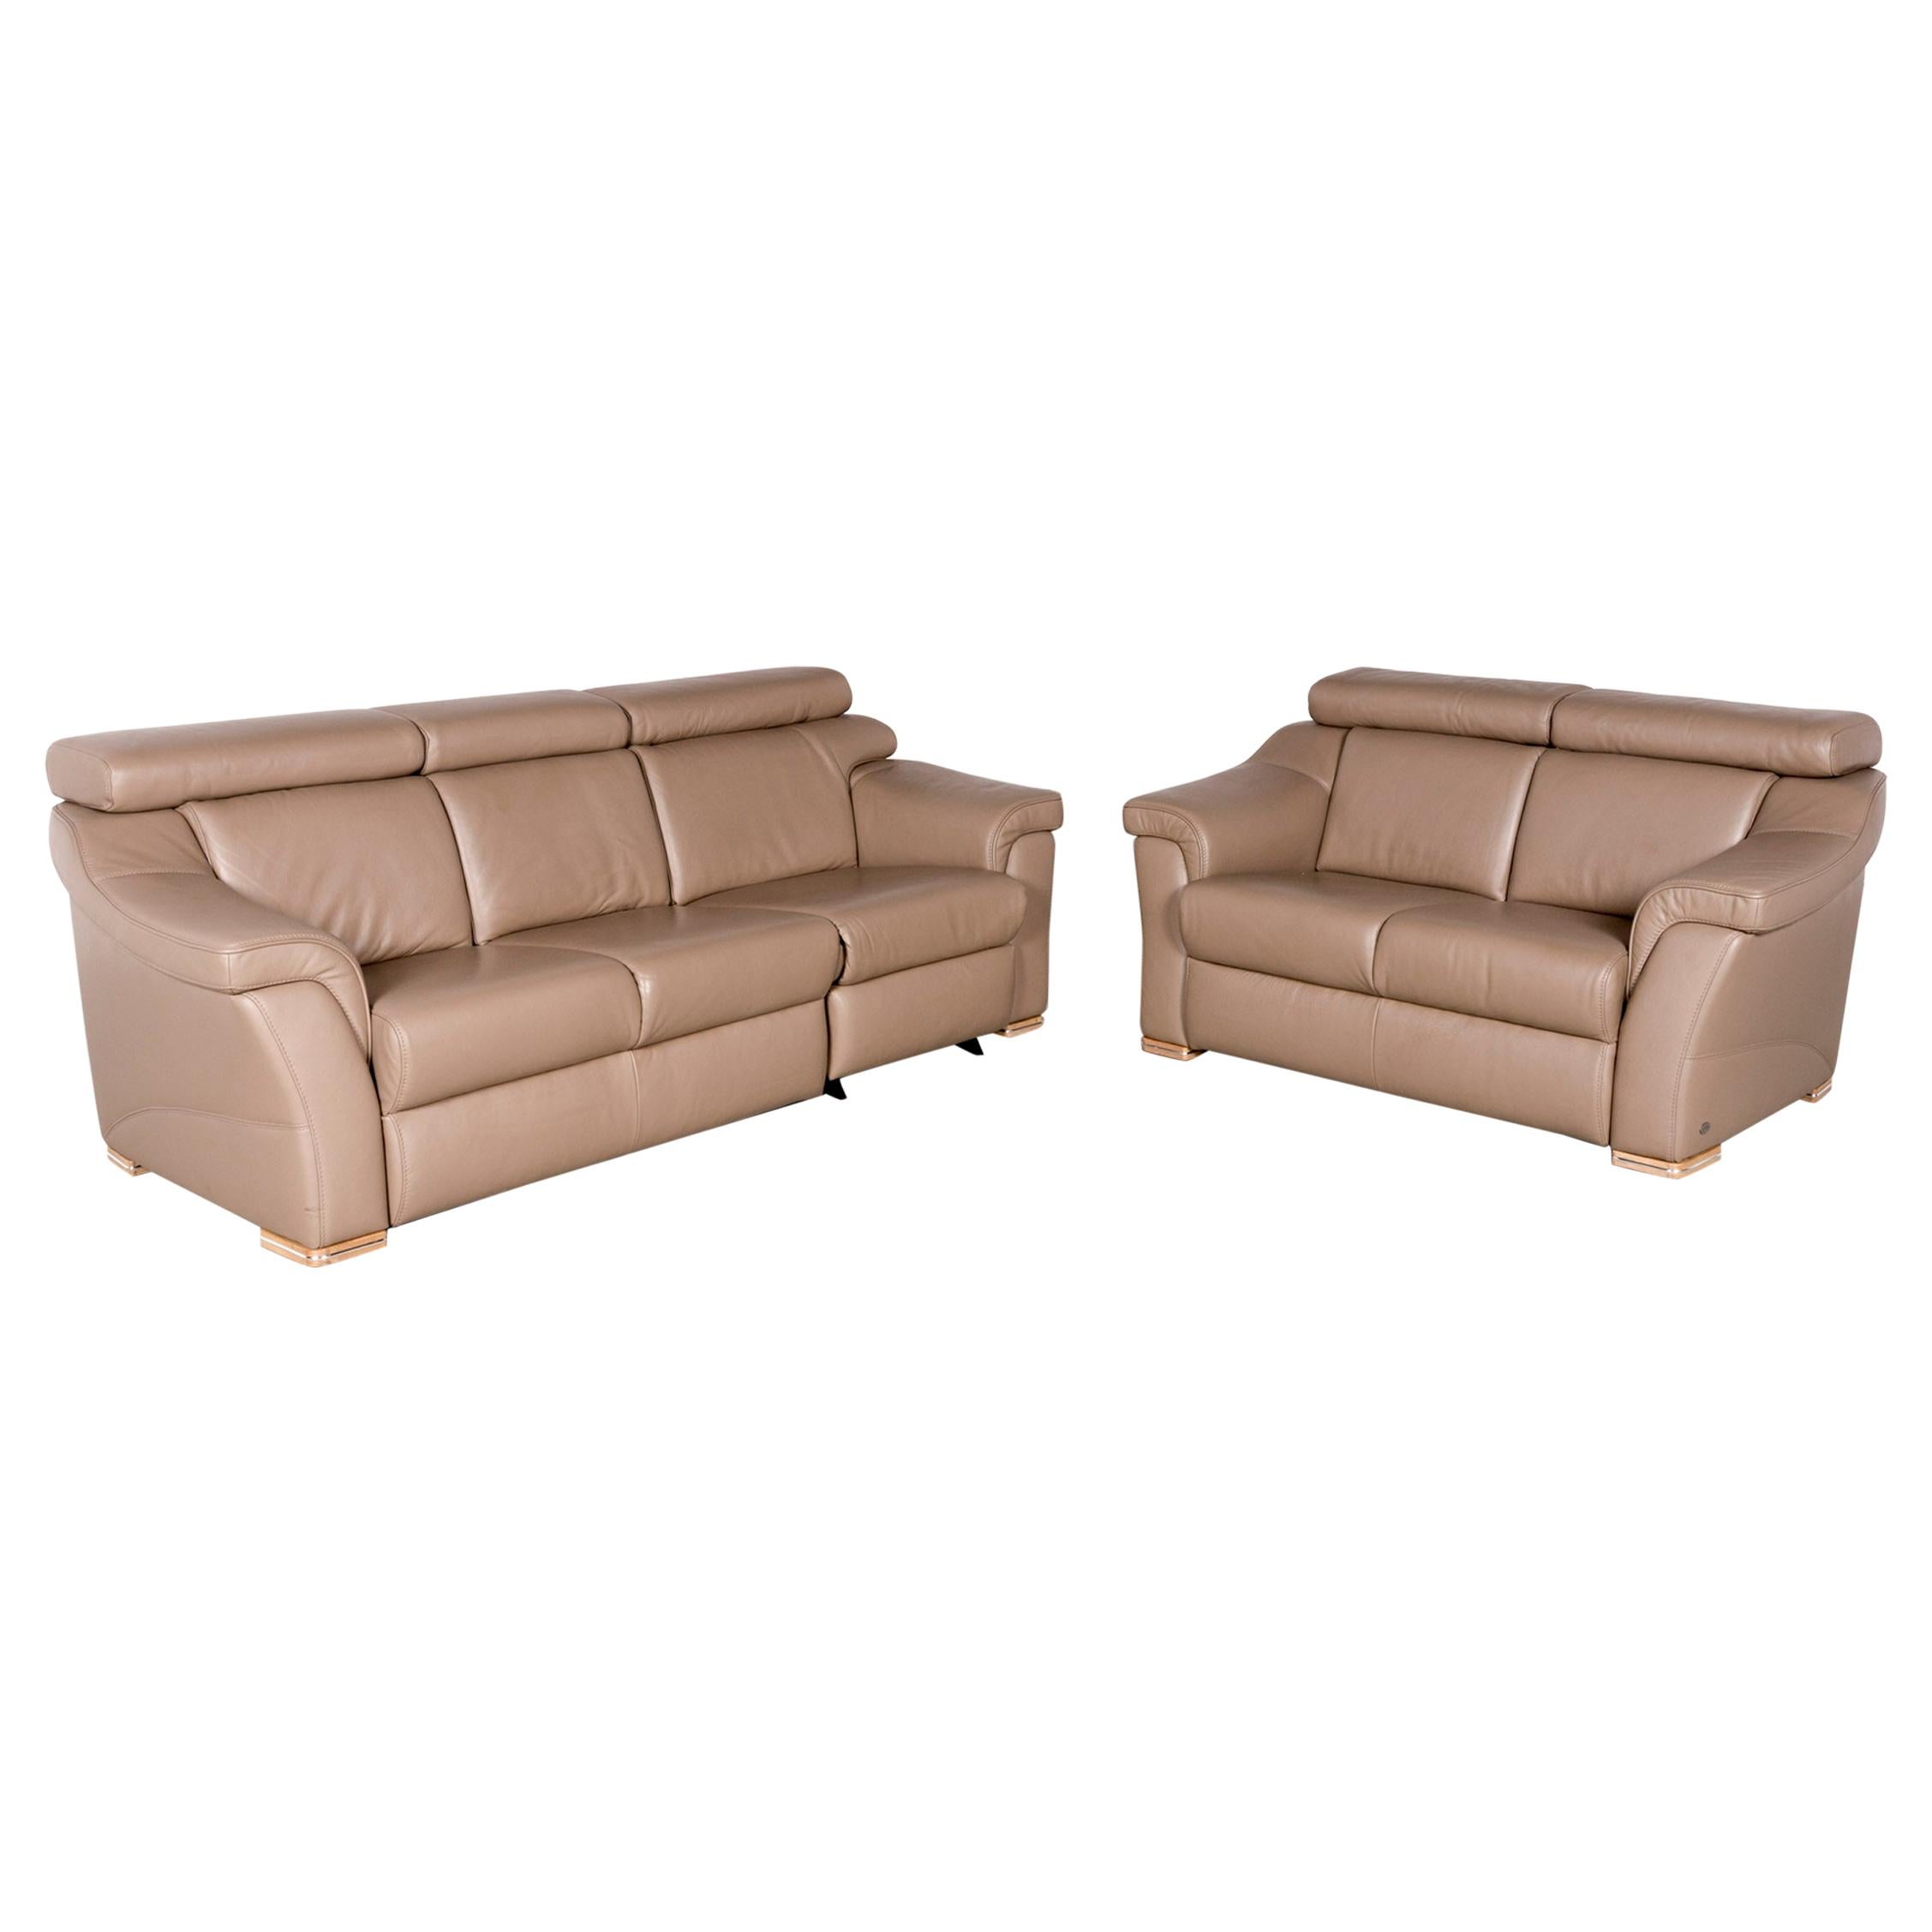 Himolla Designer Leather Sofa Set Brown Genuine Leather Two-Seat Three-Seat For Sale